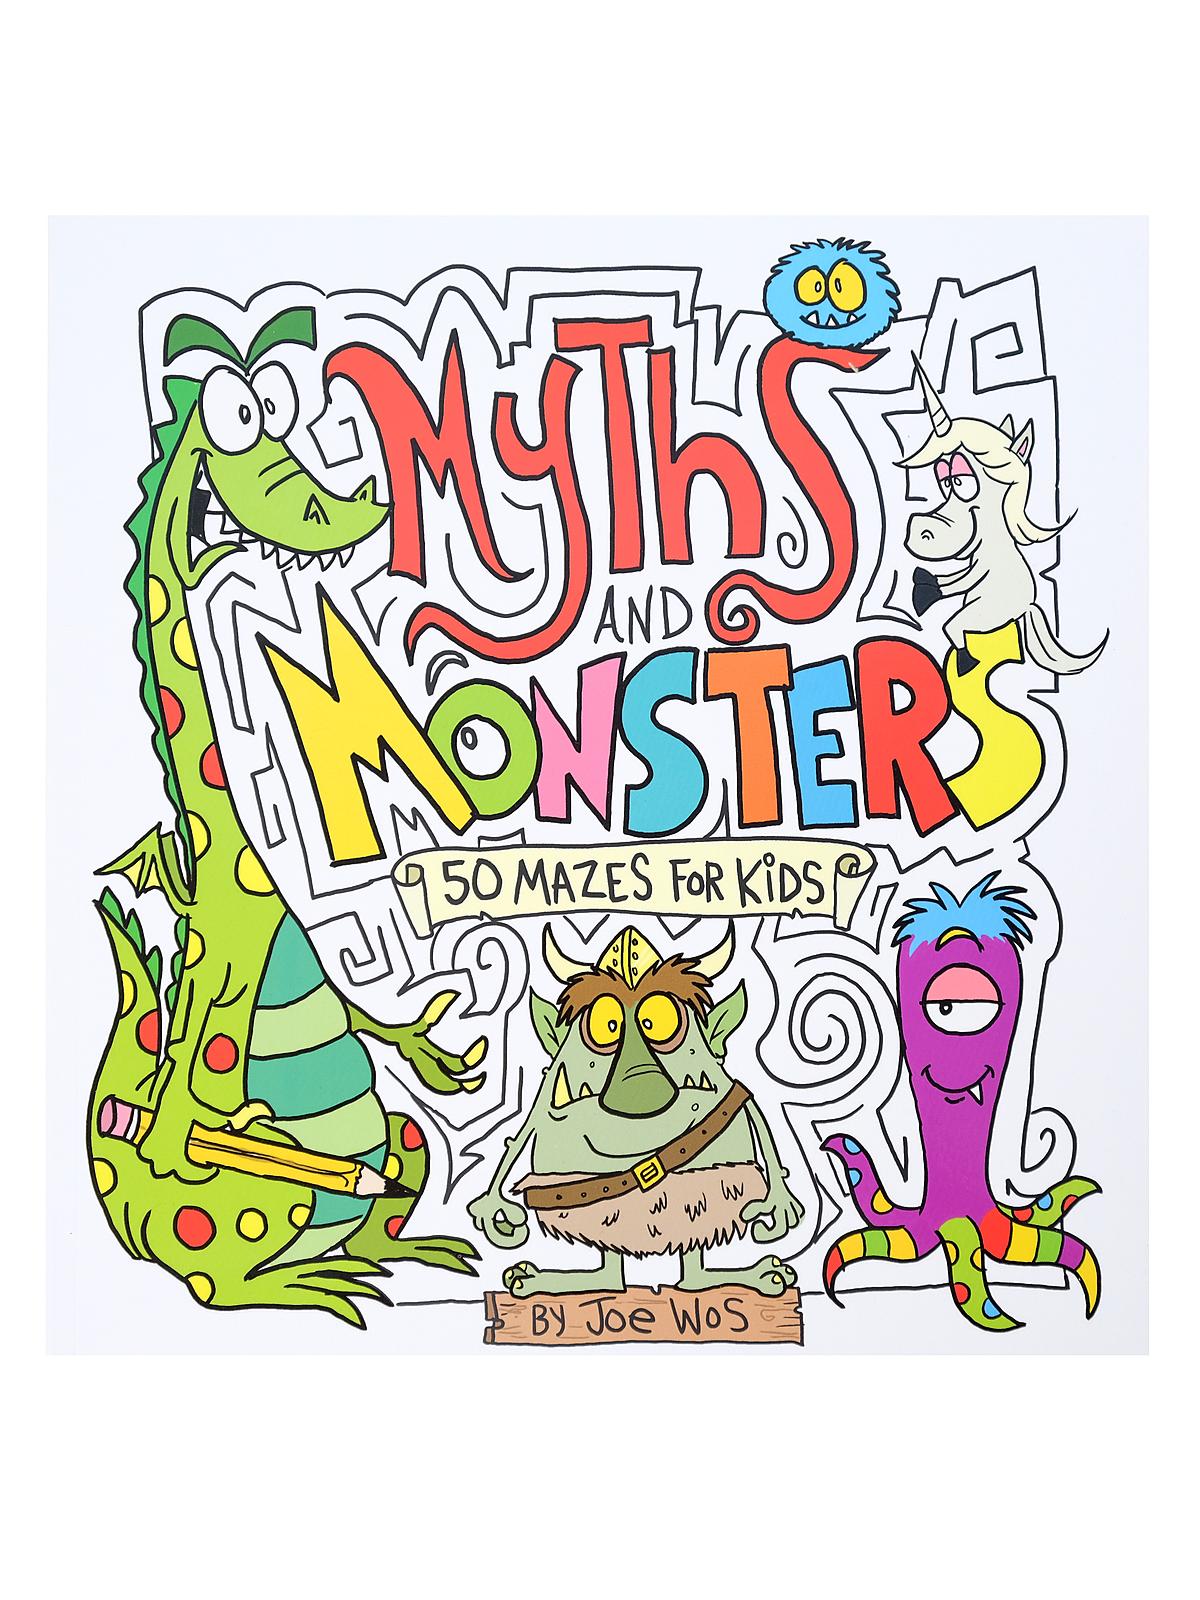 Myths And Monsters Each